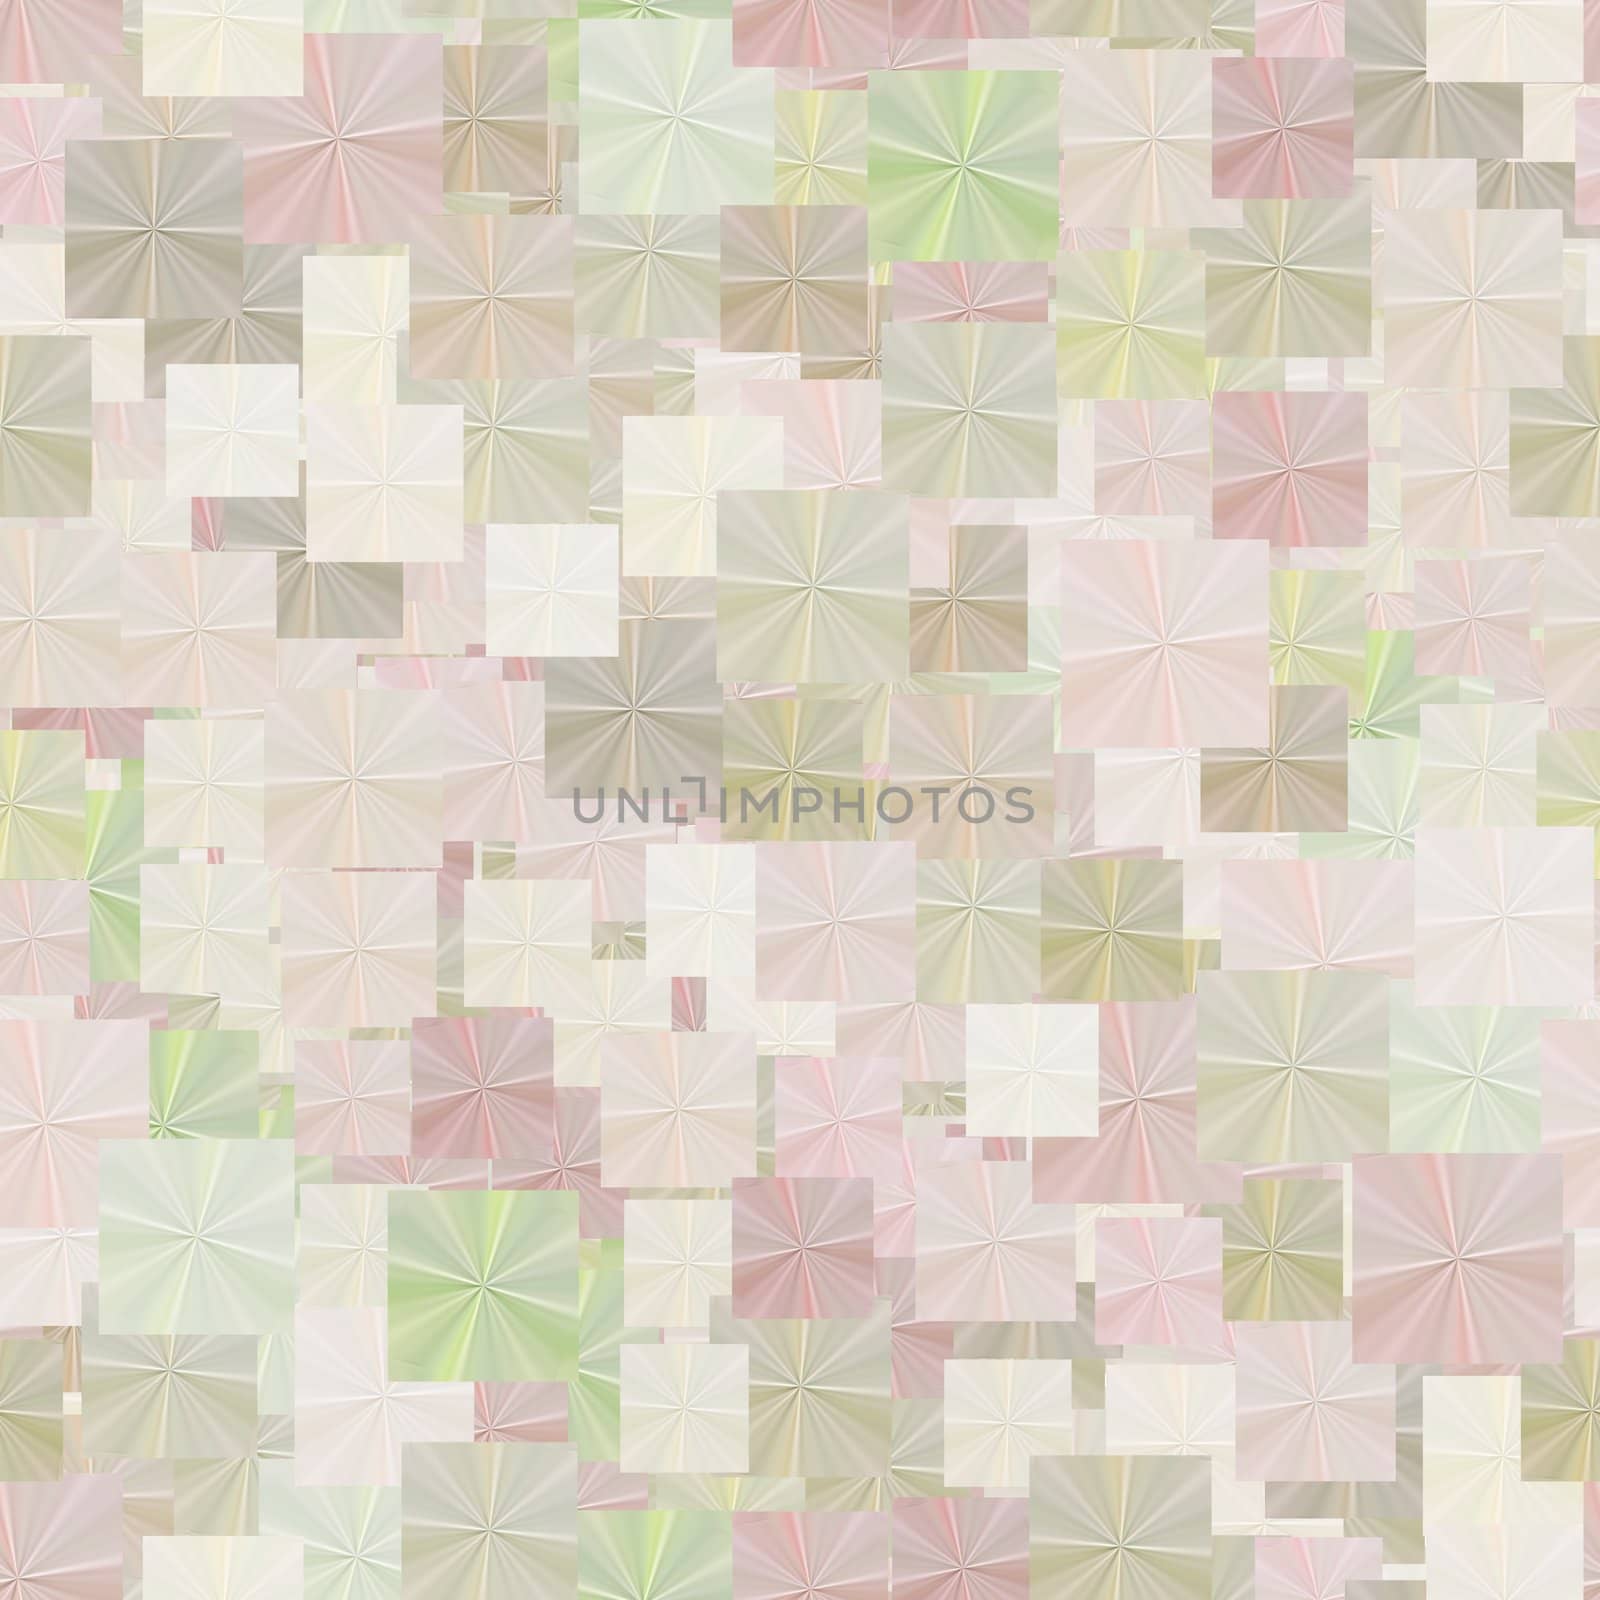 texture of many folded square papers in soft colors